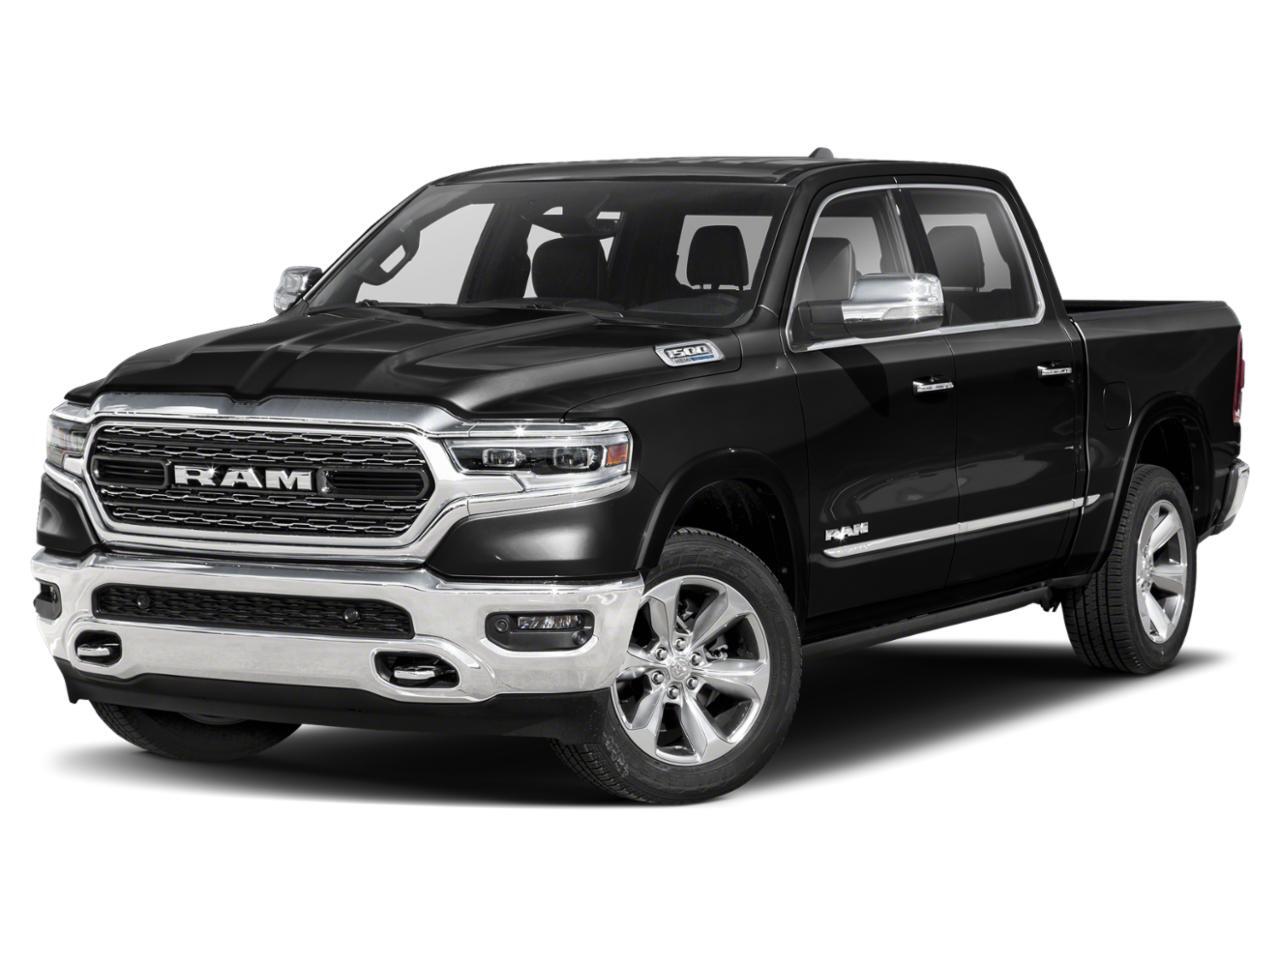 2022 Ram 1500 Limited V8 | Lvl 1 Equip | Night Edition | Tow Grp